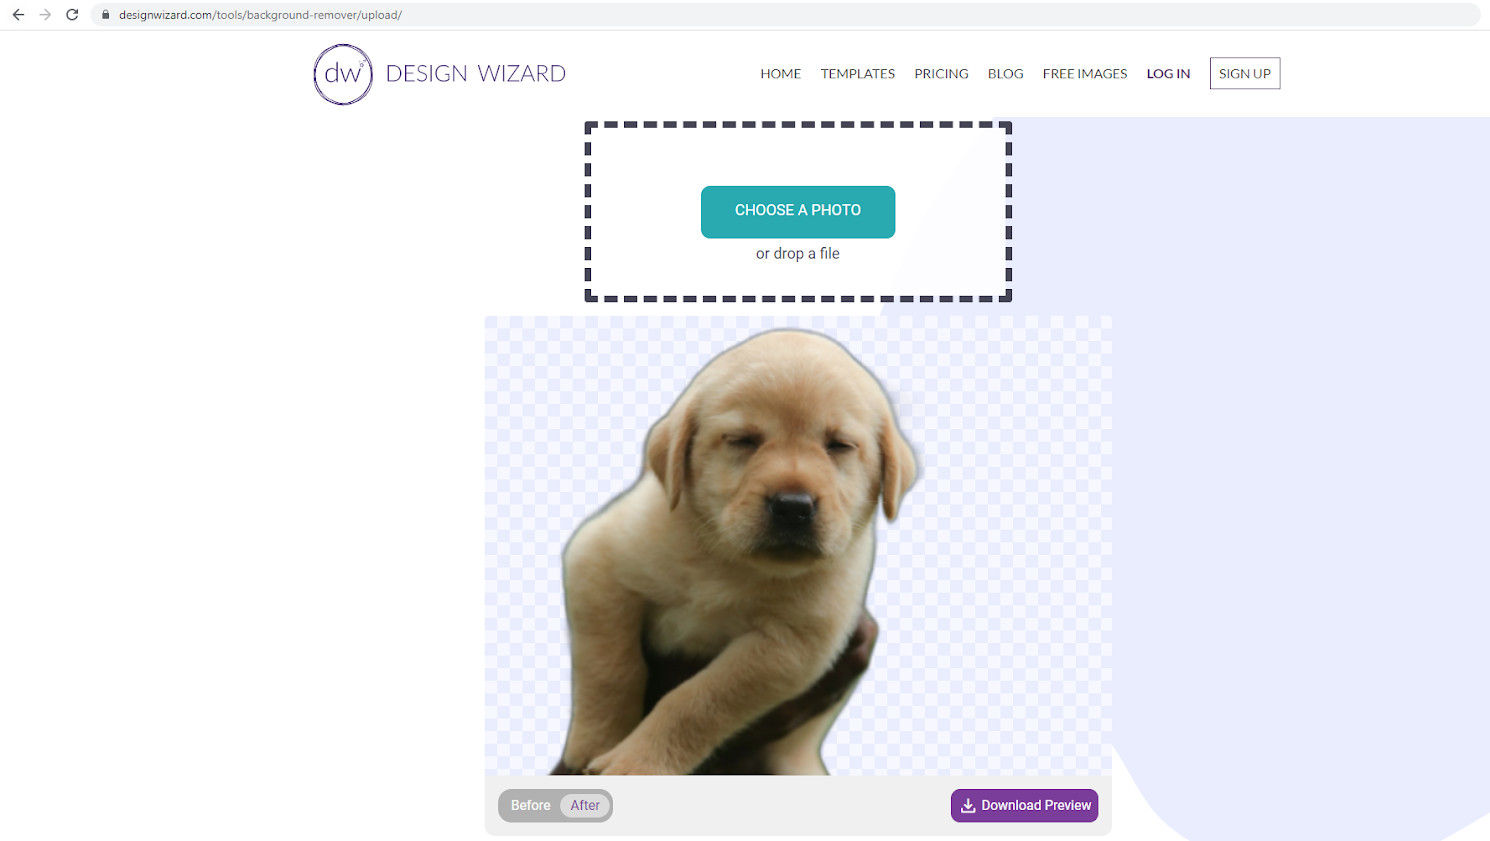 Screenshot of page with picture of a puppy